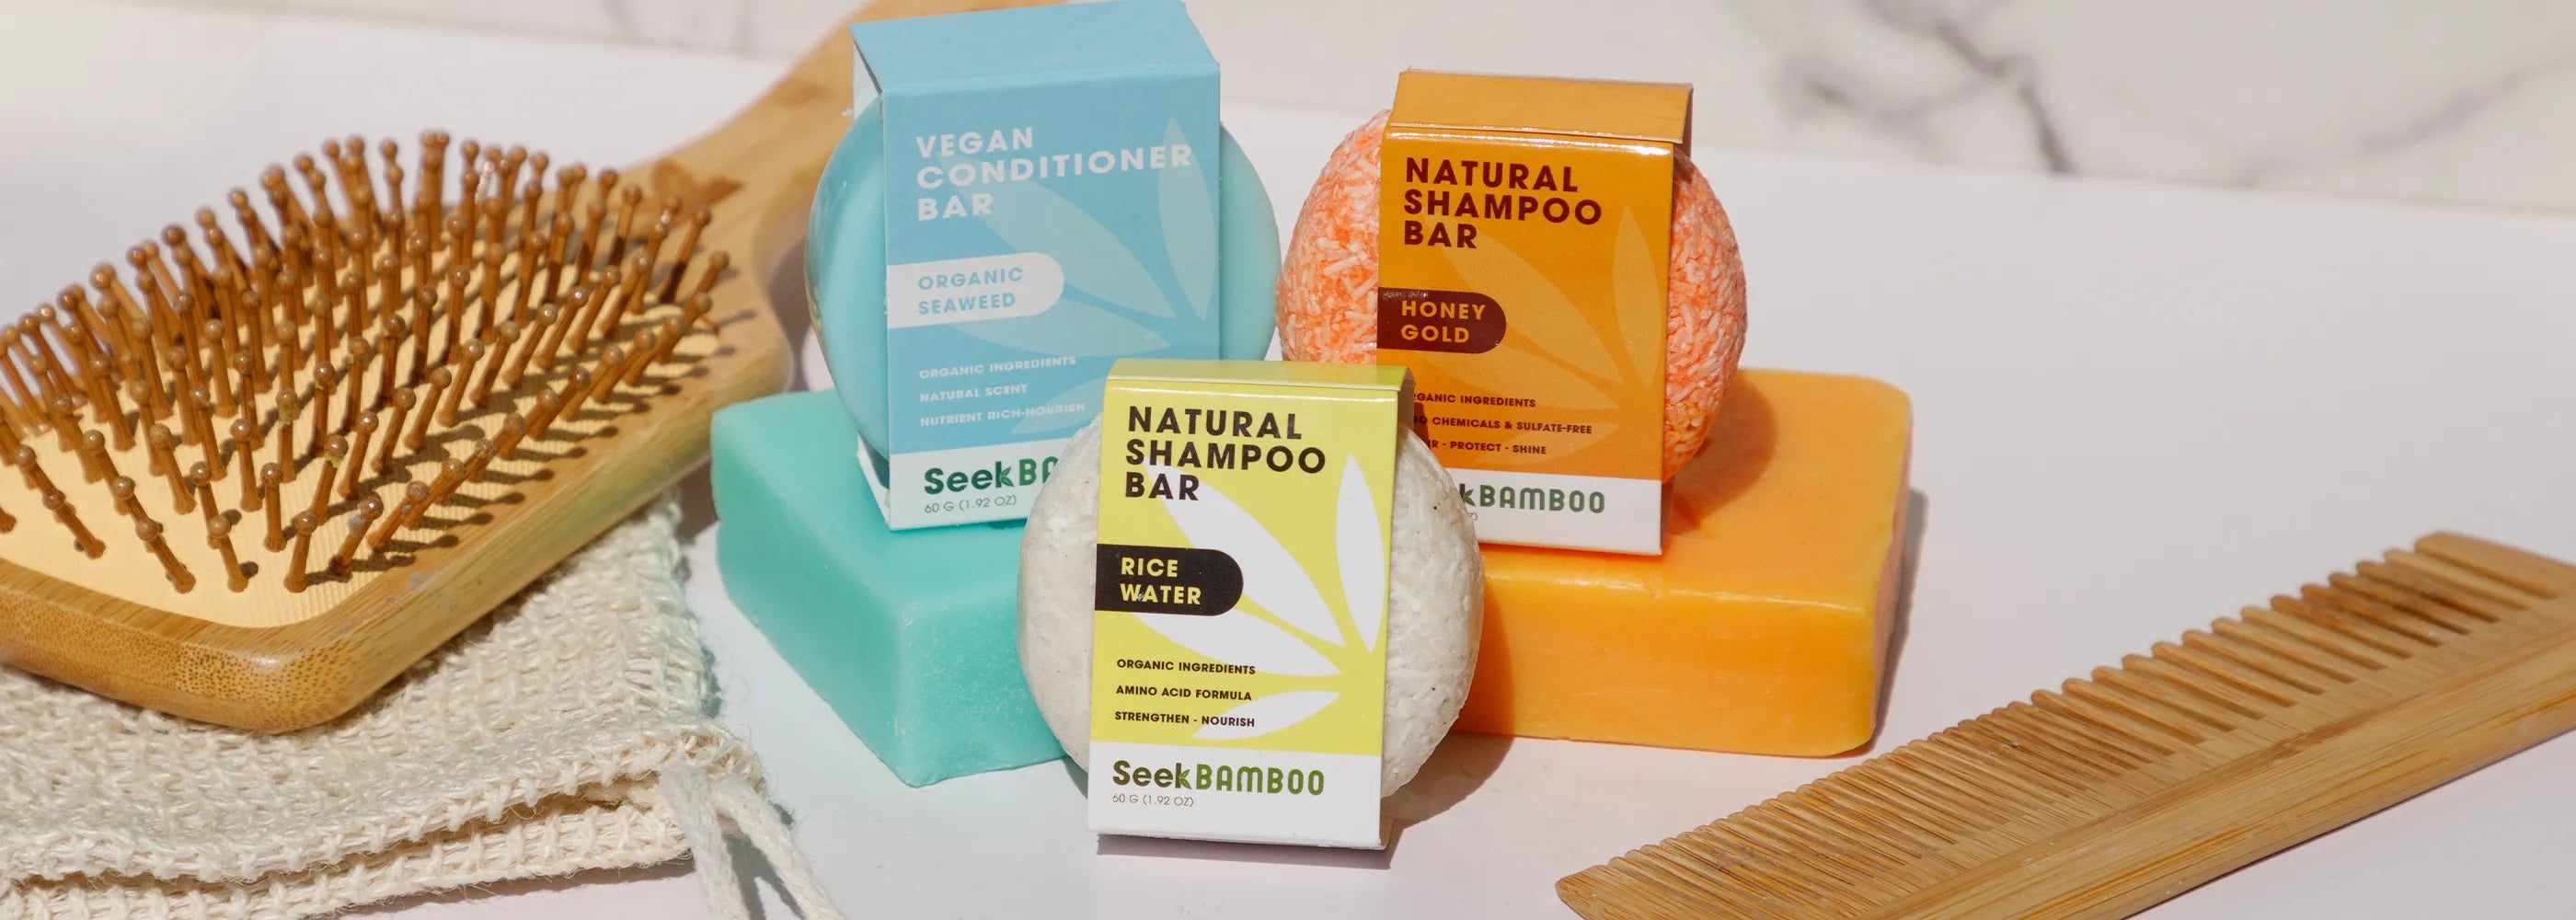 all-natural hair care - shampoo and conditioner bars